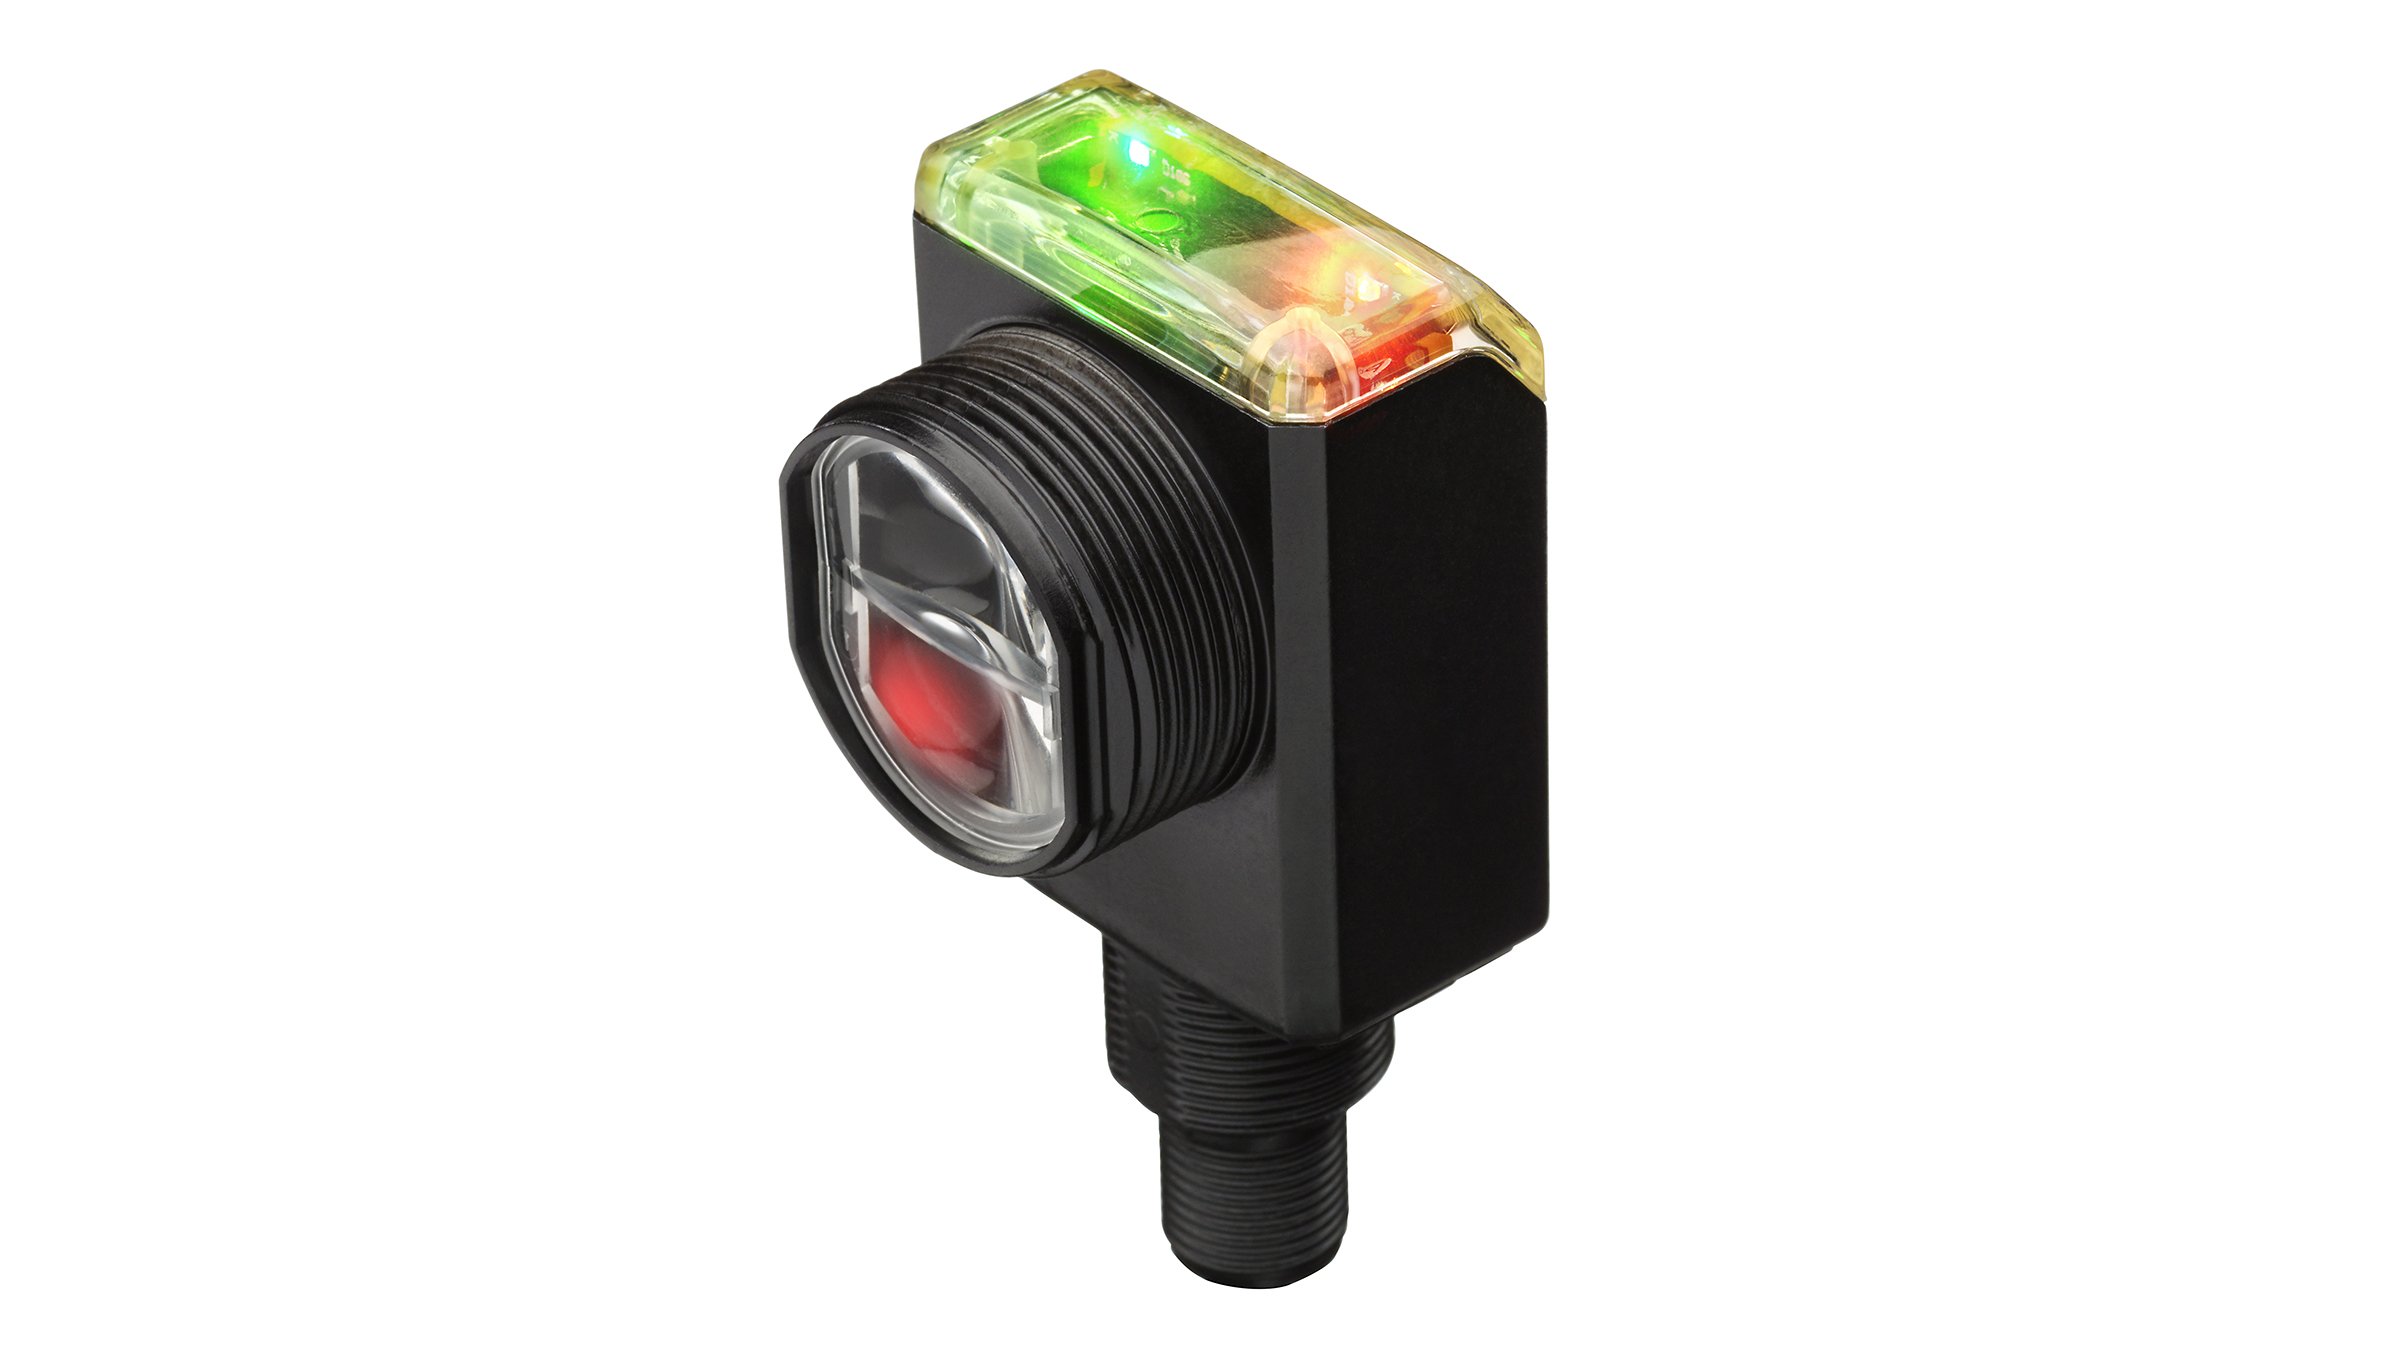 Black, rectangular sensor with sensor head on front and red and green LED indication on top